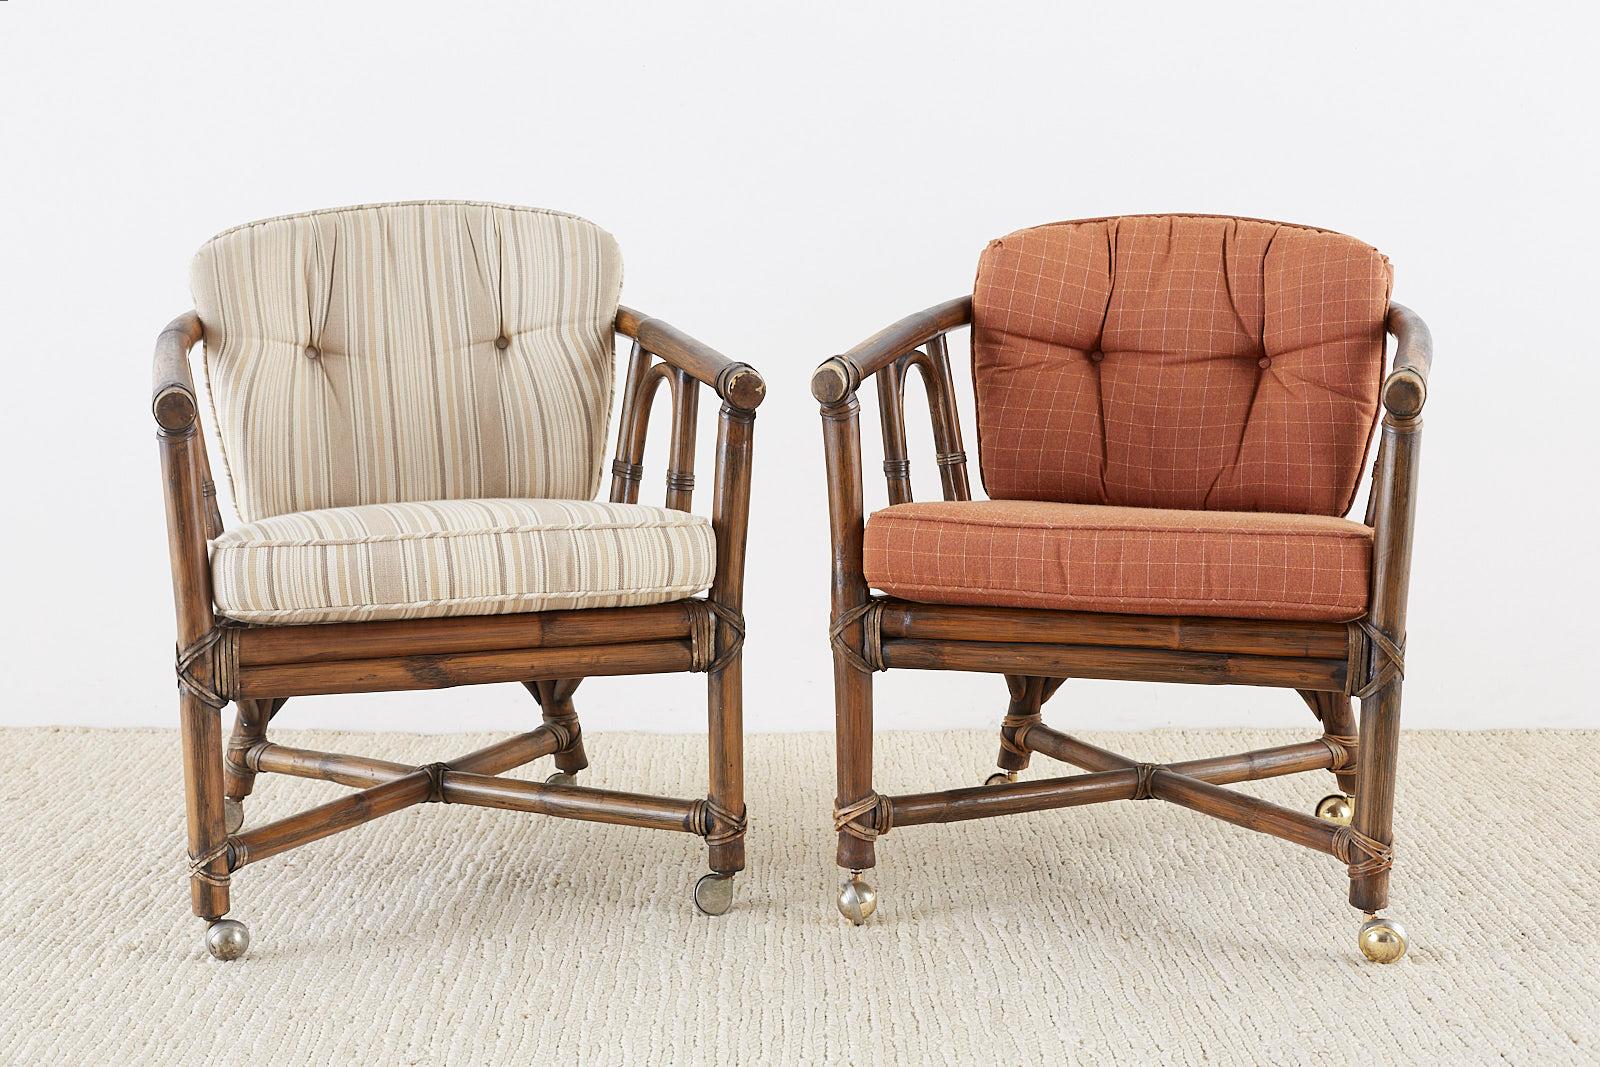 Details about   McGuire Furniture Arm Chair Rattan Bamboo Vintage 